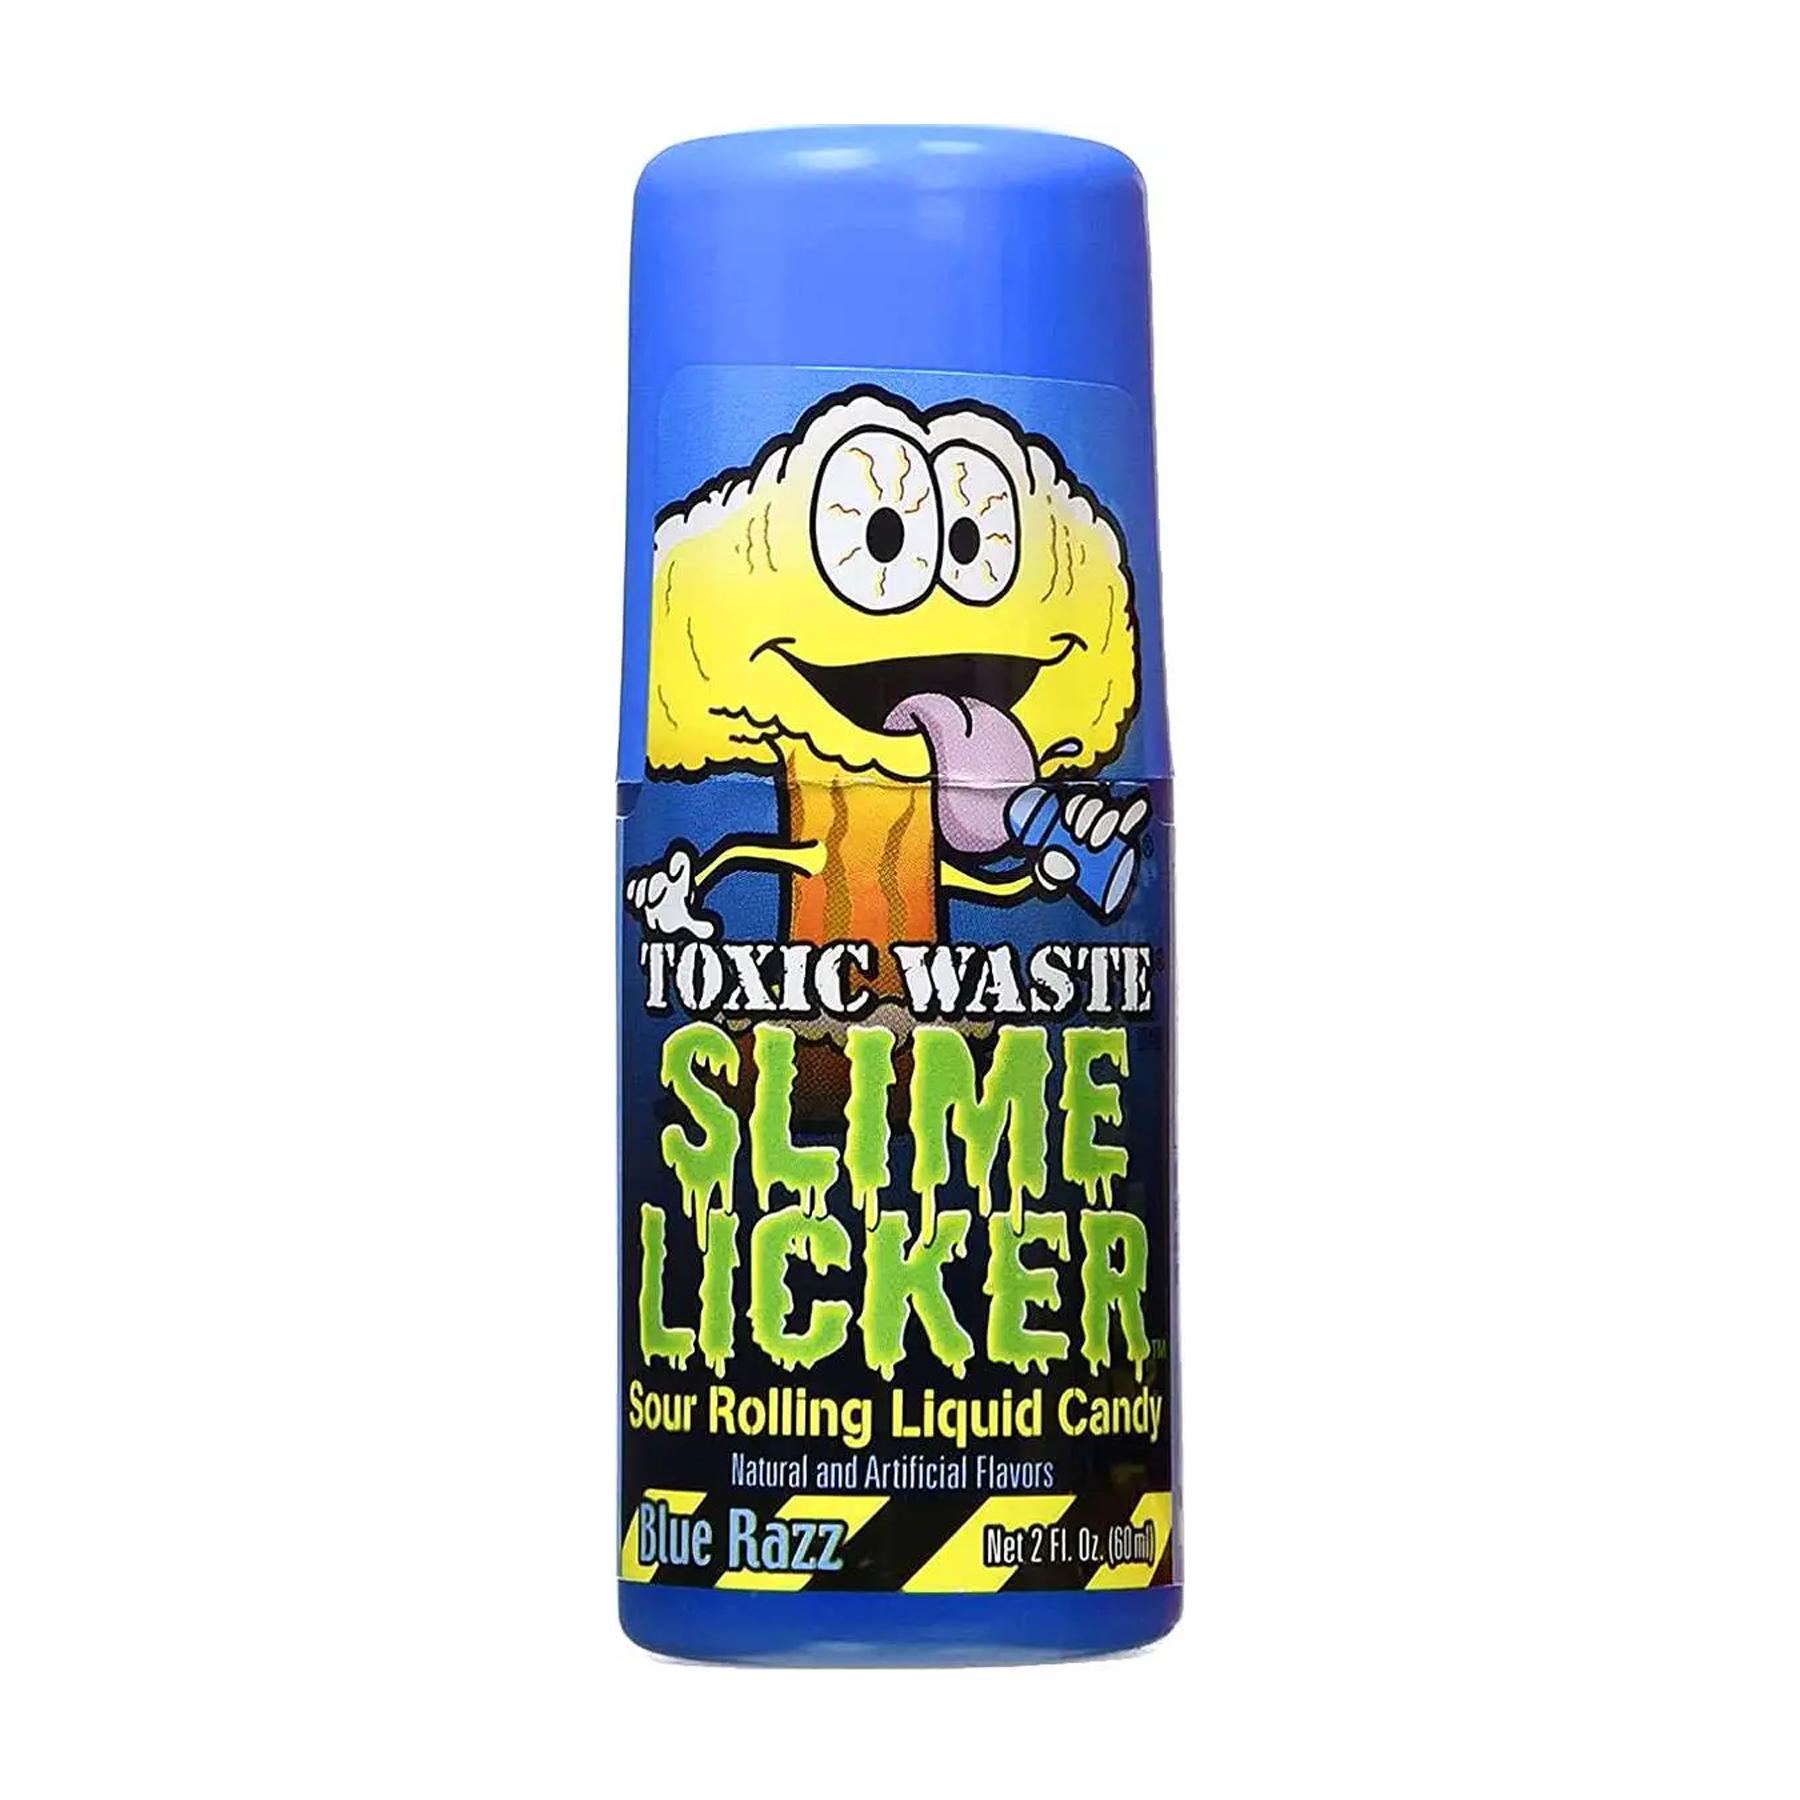 Toxic Waste Slime Licker Blue Razz Sour Rolling Liquid Candy